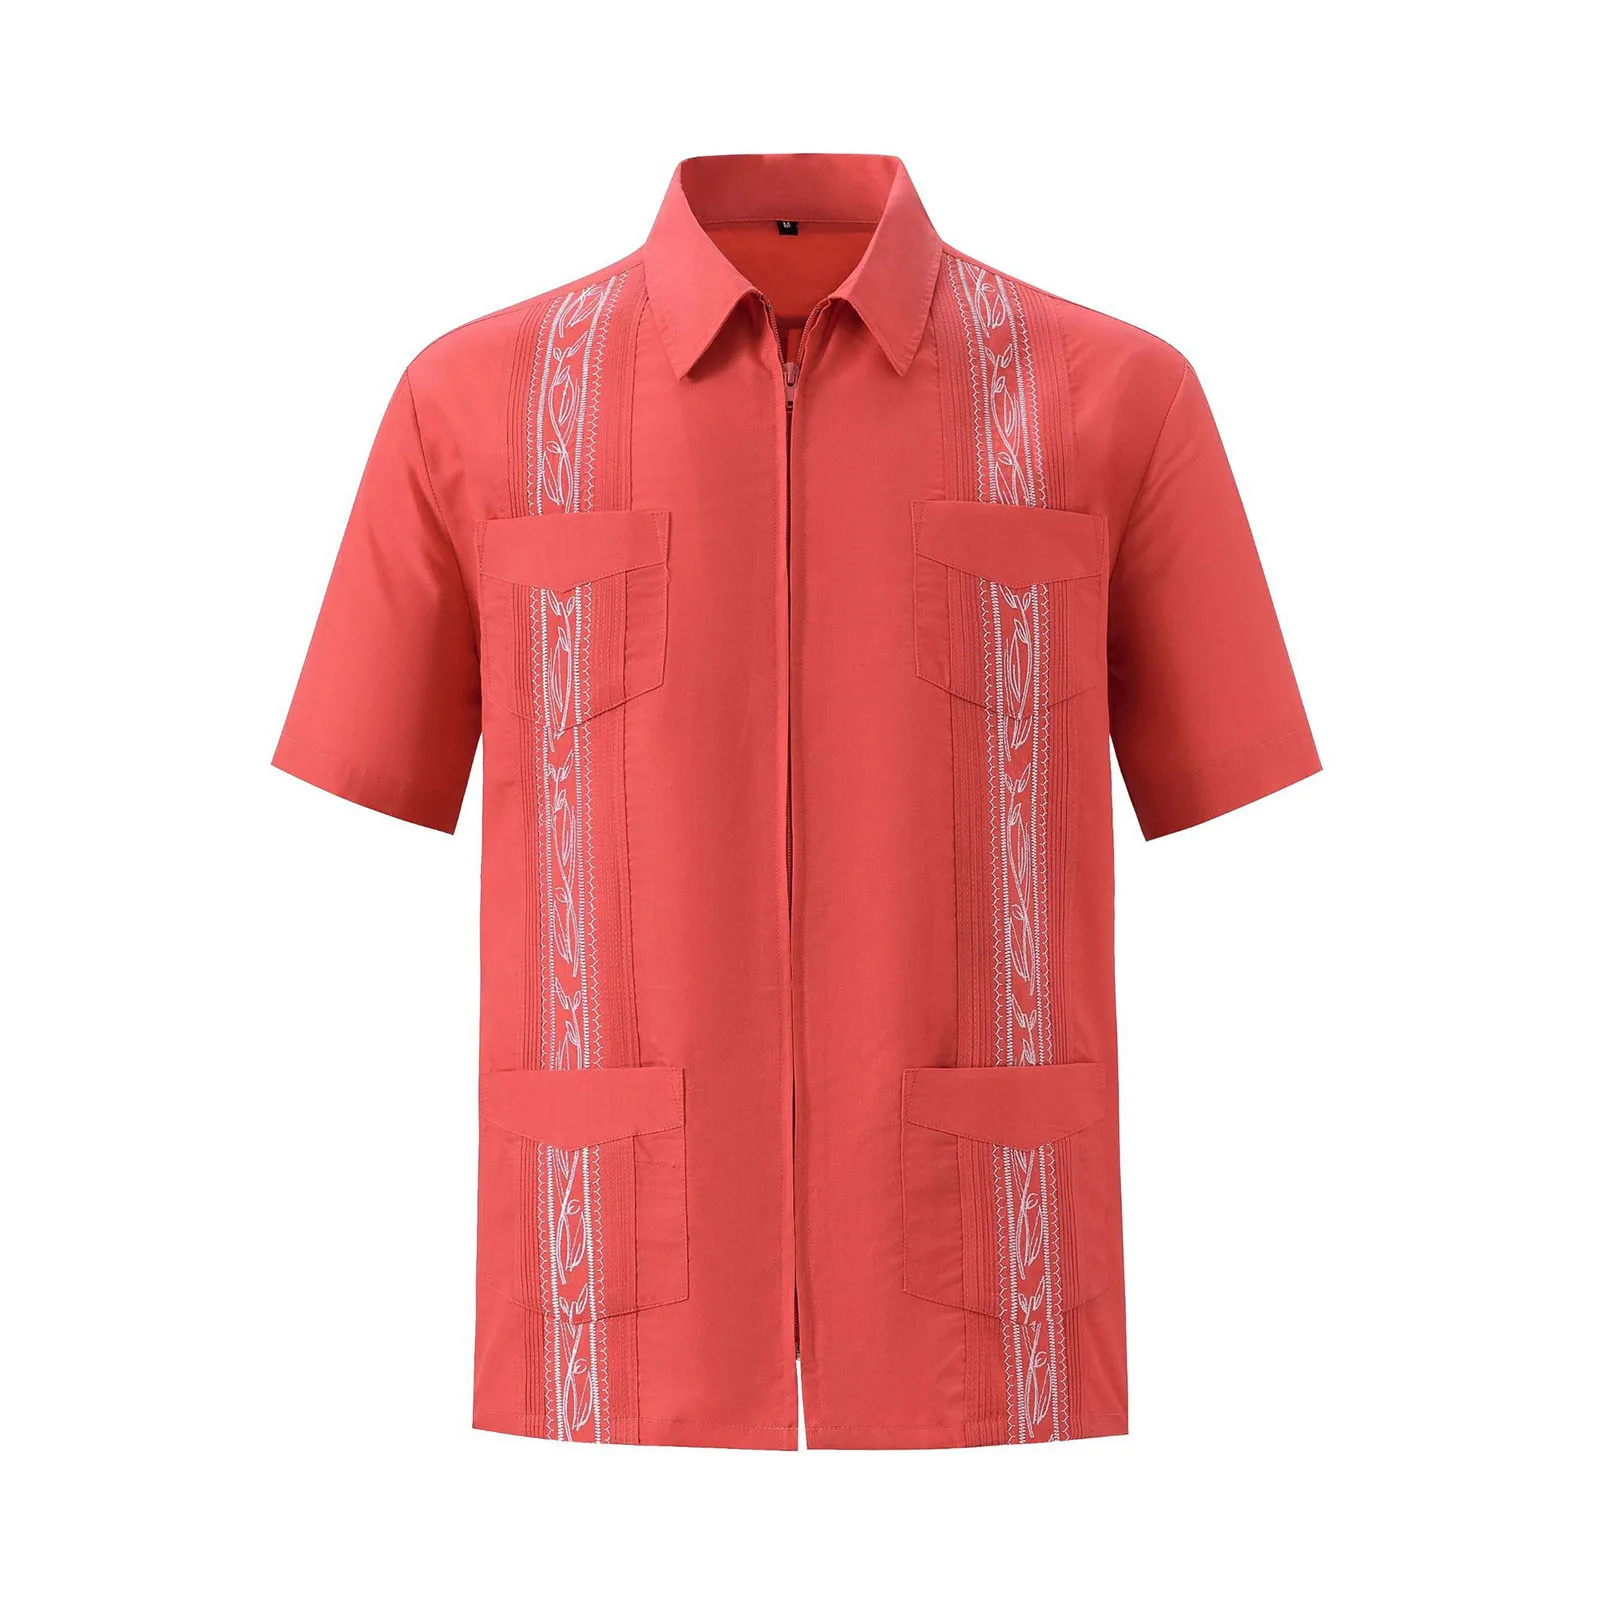 Men's Embroidery Shirt Full Zipper Short Sleeve Turn Down Collar Guayabera Shirts With Pockets Summer Vintage Mexican Shirt Tops mexican mariachi mariachi band fan apron for women with pocket barber household items apron